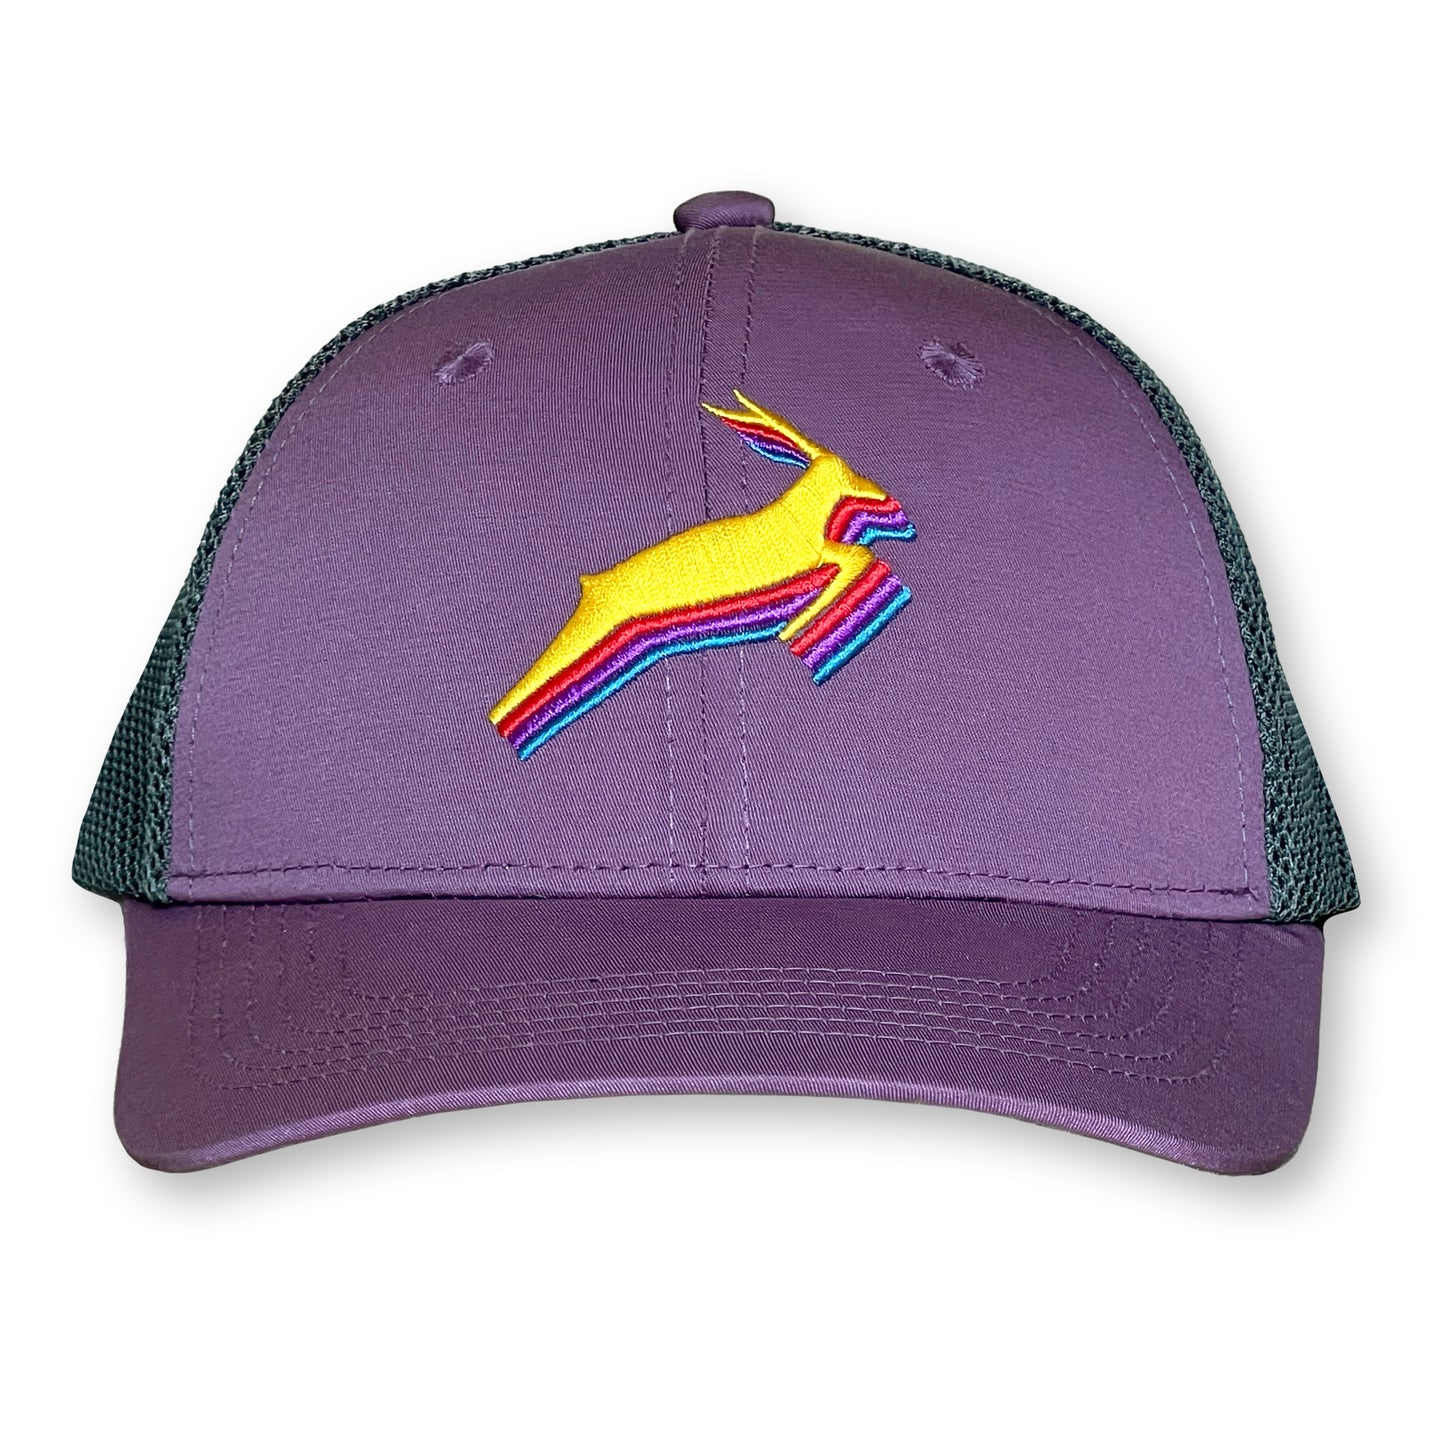 Antelope Trucker Hat / Mauve Polycotton Blend with Graphite Mesh and Daffodil Antelope